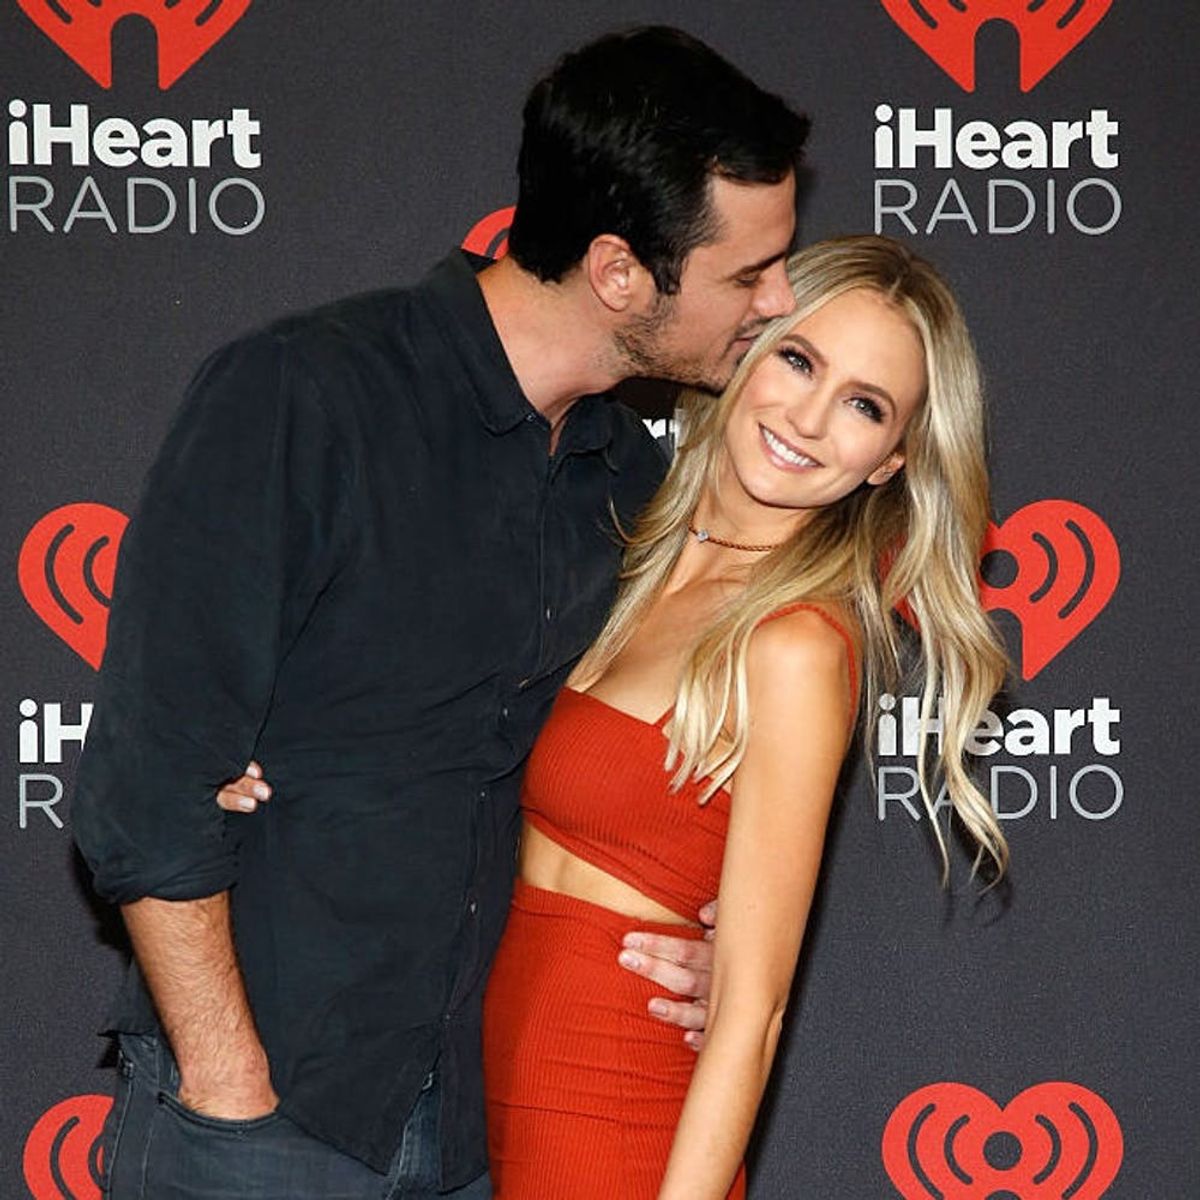 Ben Higgins Says Kissing Someone “Would Be Really Hard” After His Split from Lauren Bushnell